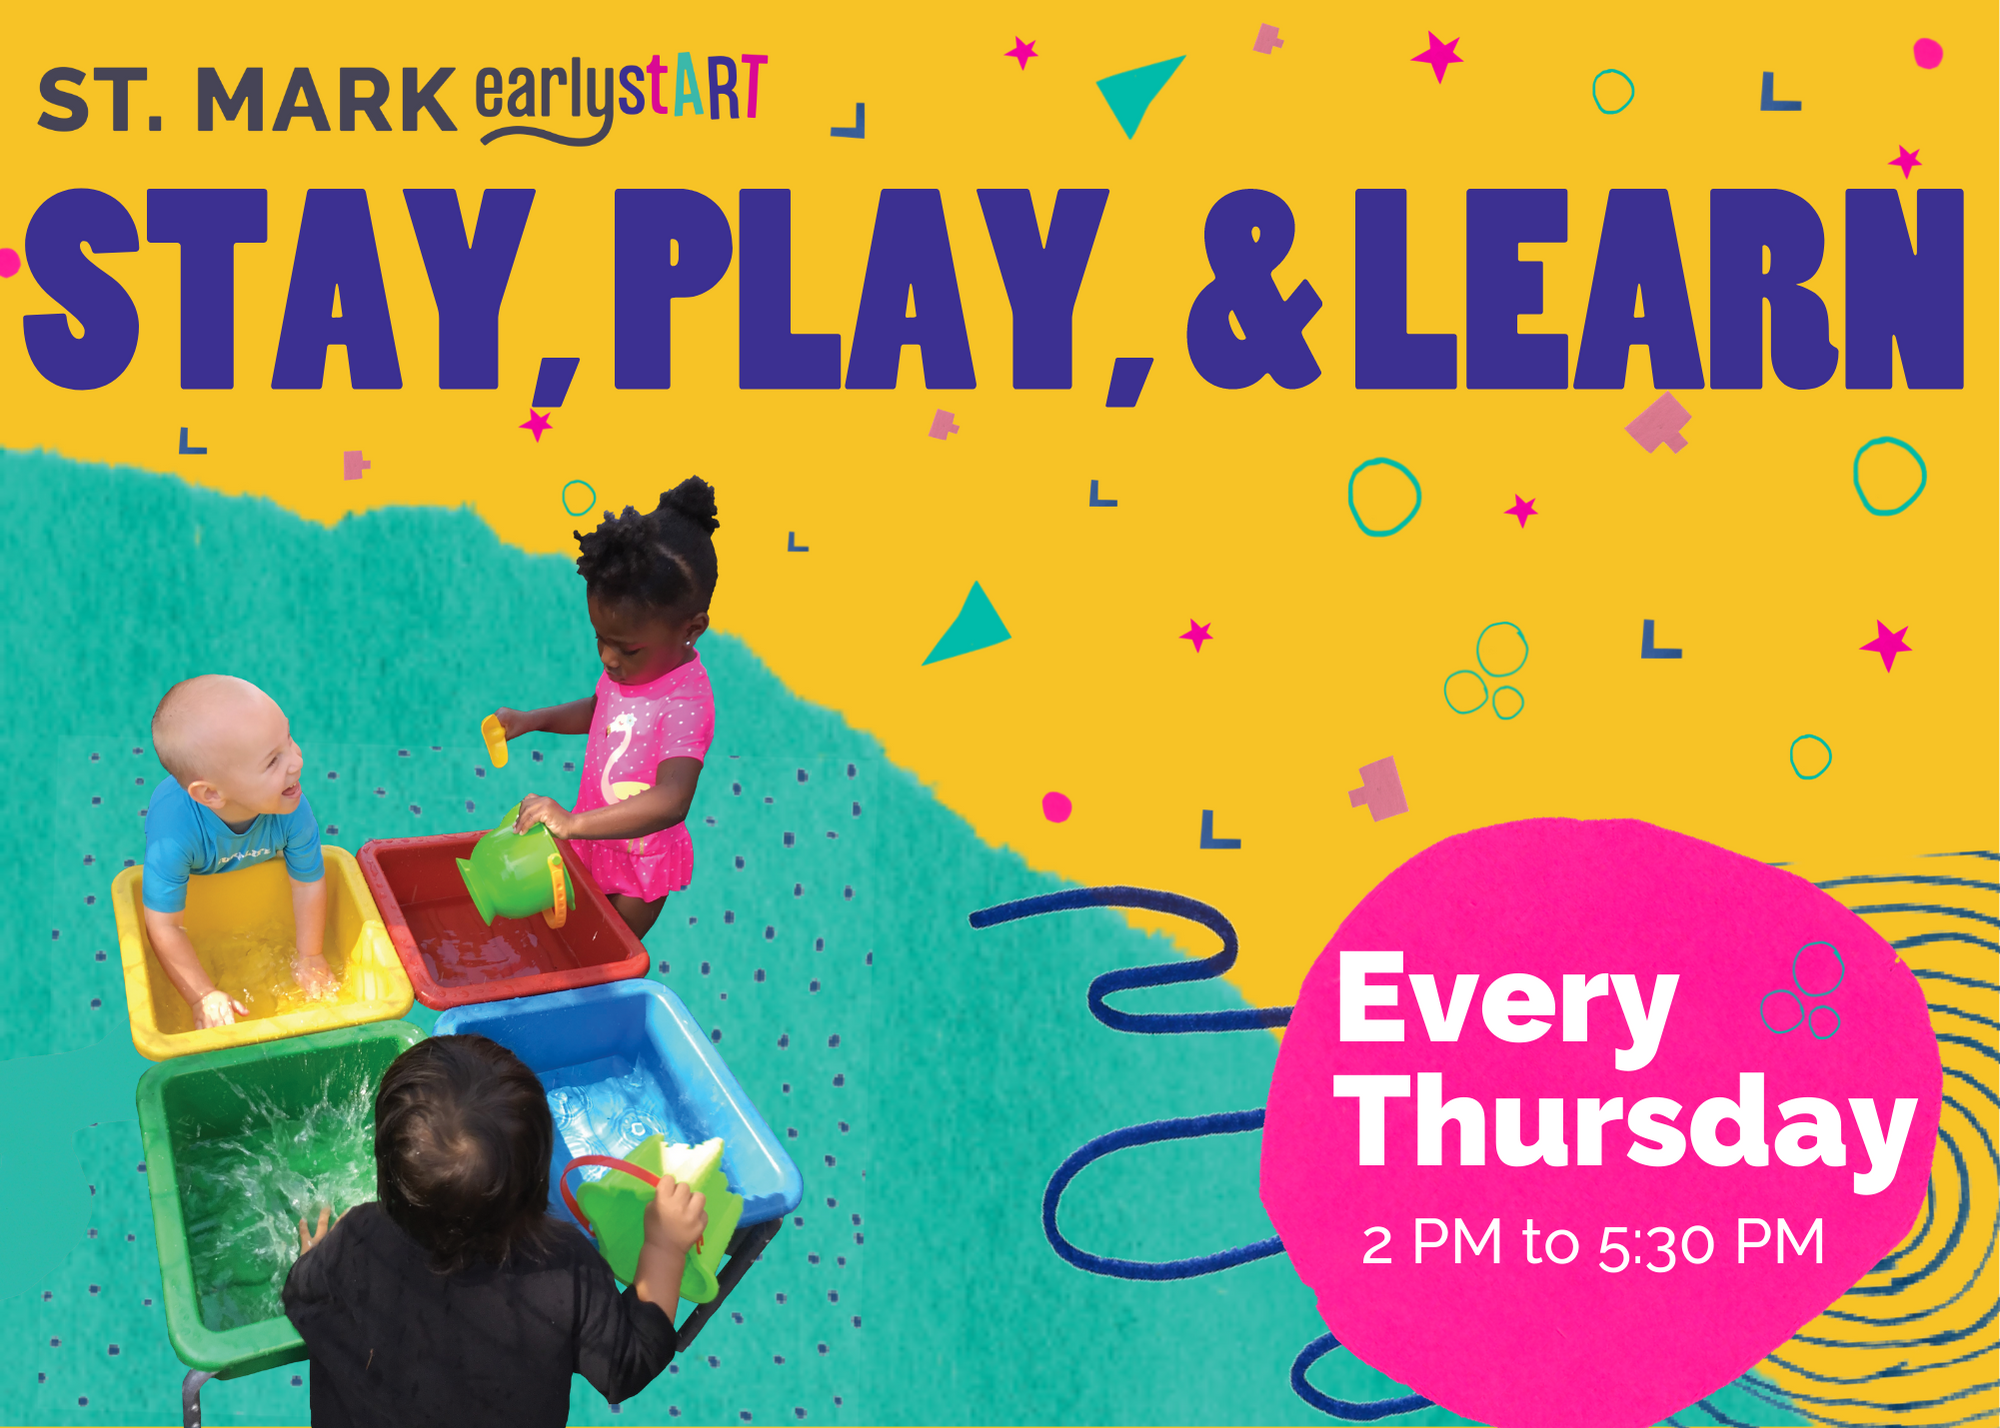 St. Mark EarlystART STAY, PLAY, and LEARN Every Thursday 2 PM to 5:30 PM